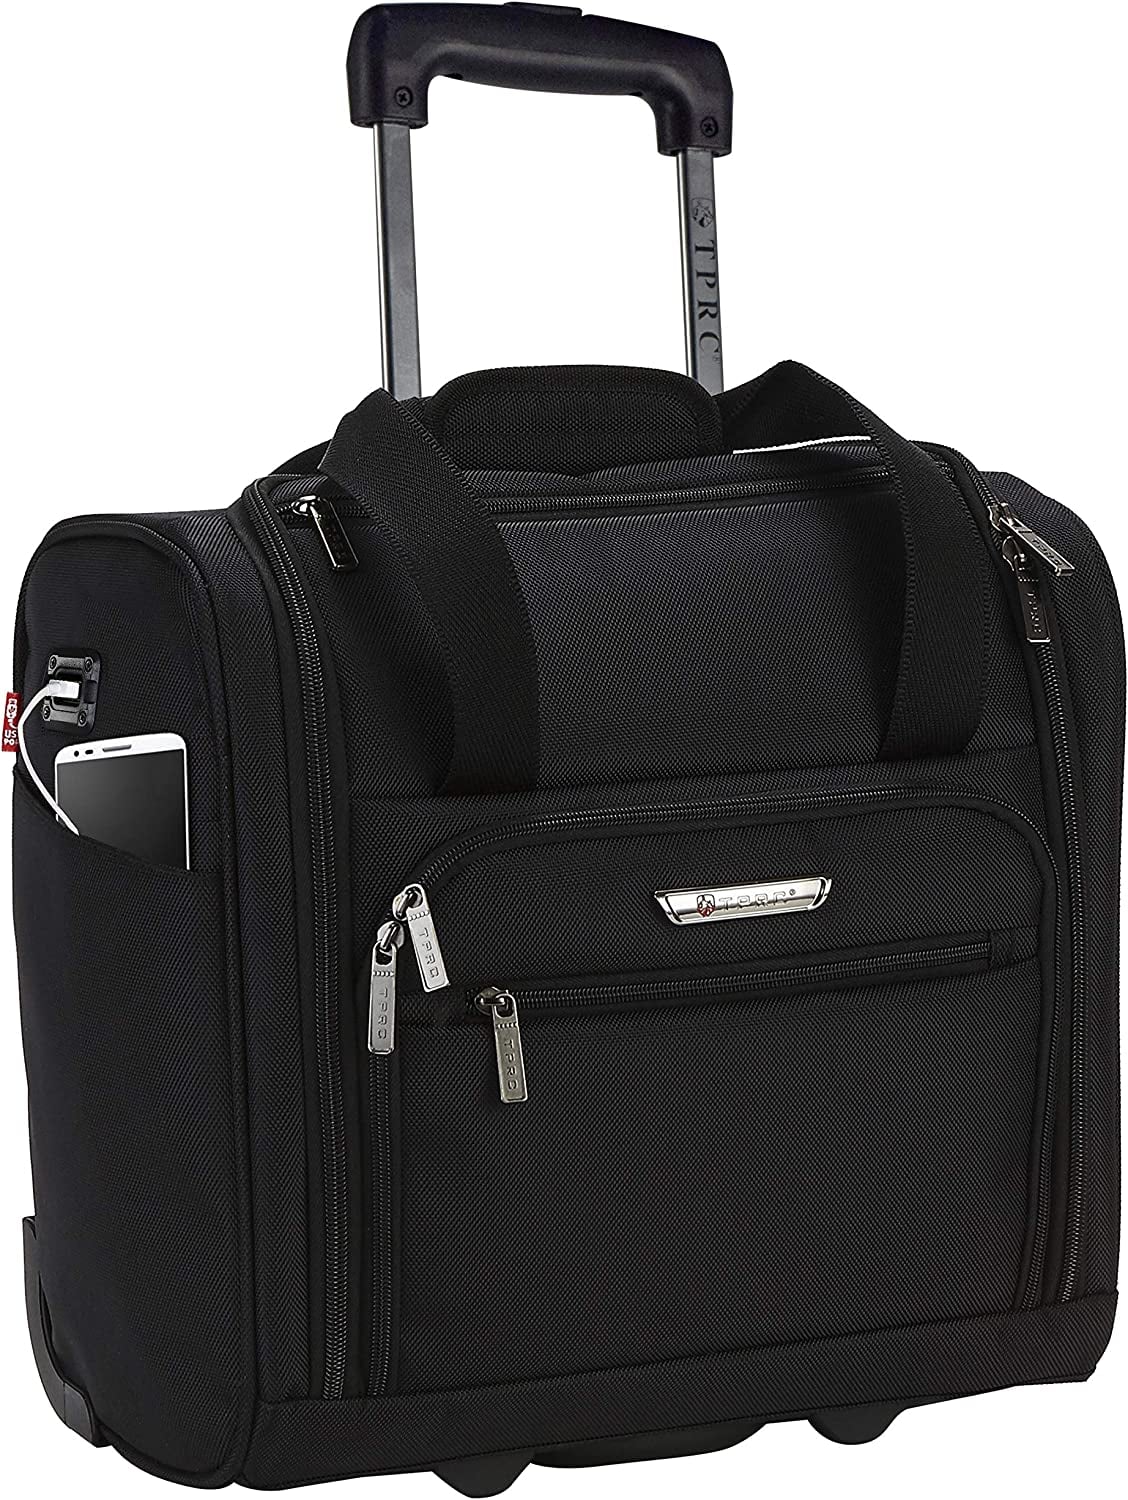 <p><a href="https://www.amazon.com/TPRC-Luggage-Durable-Constructed-Millions/dp/B0762VC1XB/">BUY NOW</a></p><p>$51</p><p><a href="https://www.amazon.com/TPRC-Luggage-Durable-Constructed-Millions/dp/B0762VC1XB/" class="ga-track"><strong>TPRC 15-Inch Smart Under Seat Carry-On Luggage</strong></a> ($51, originally $59)</p> <p>The TPRC 15-Inch Smart Under Seat Carry-On Luggage is perfect for the traveler on the go. For starters, unlike most weekender bags and duffles, this one has wheels. This bag has a USB port that lets you attach a power bank to it, so you can charge your phone and laptop in-flight or at the gate. It's spacious on the inside with plenty of pockets and sections to stay organized. You can carry this with its top handle, wear it like a backpack, or roll it. This under-seat carry-on comes in a few other colors, like navy blue and purple. </p> <p><strong>Dimensions:</strong> 15" height x 14" wide x 8.5" depth</p>